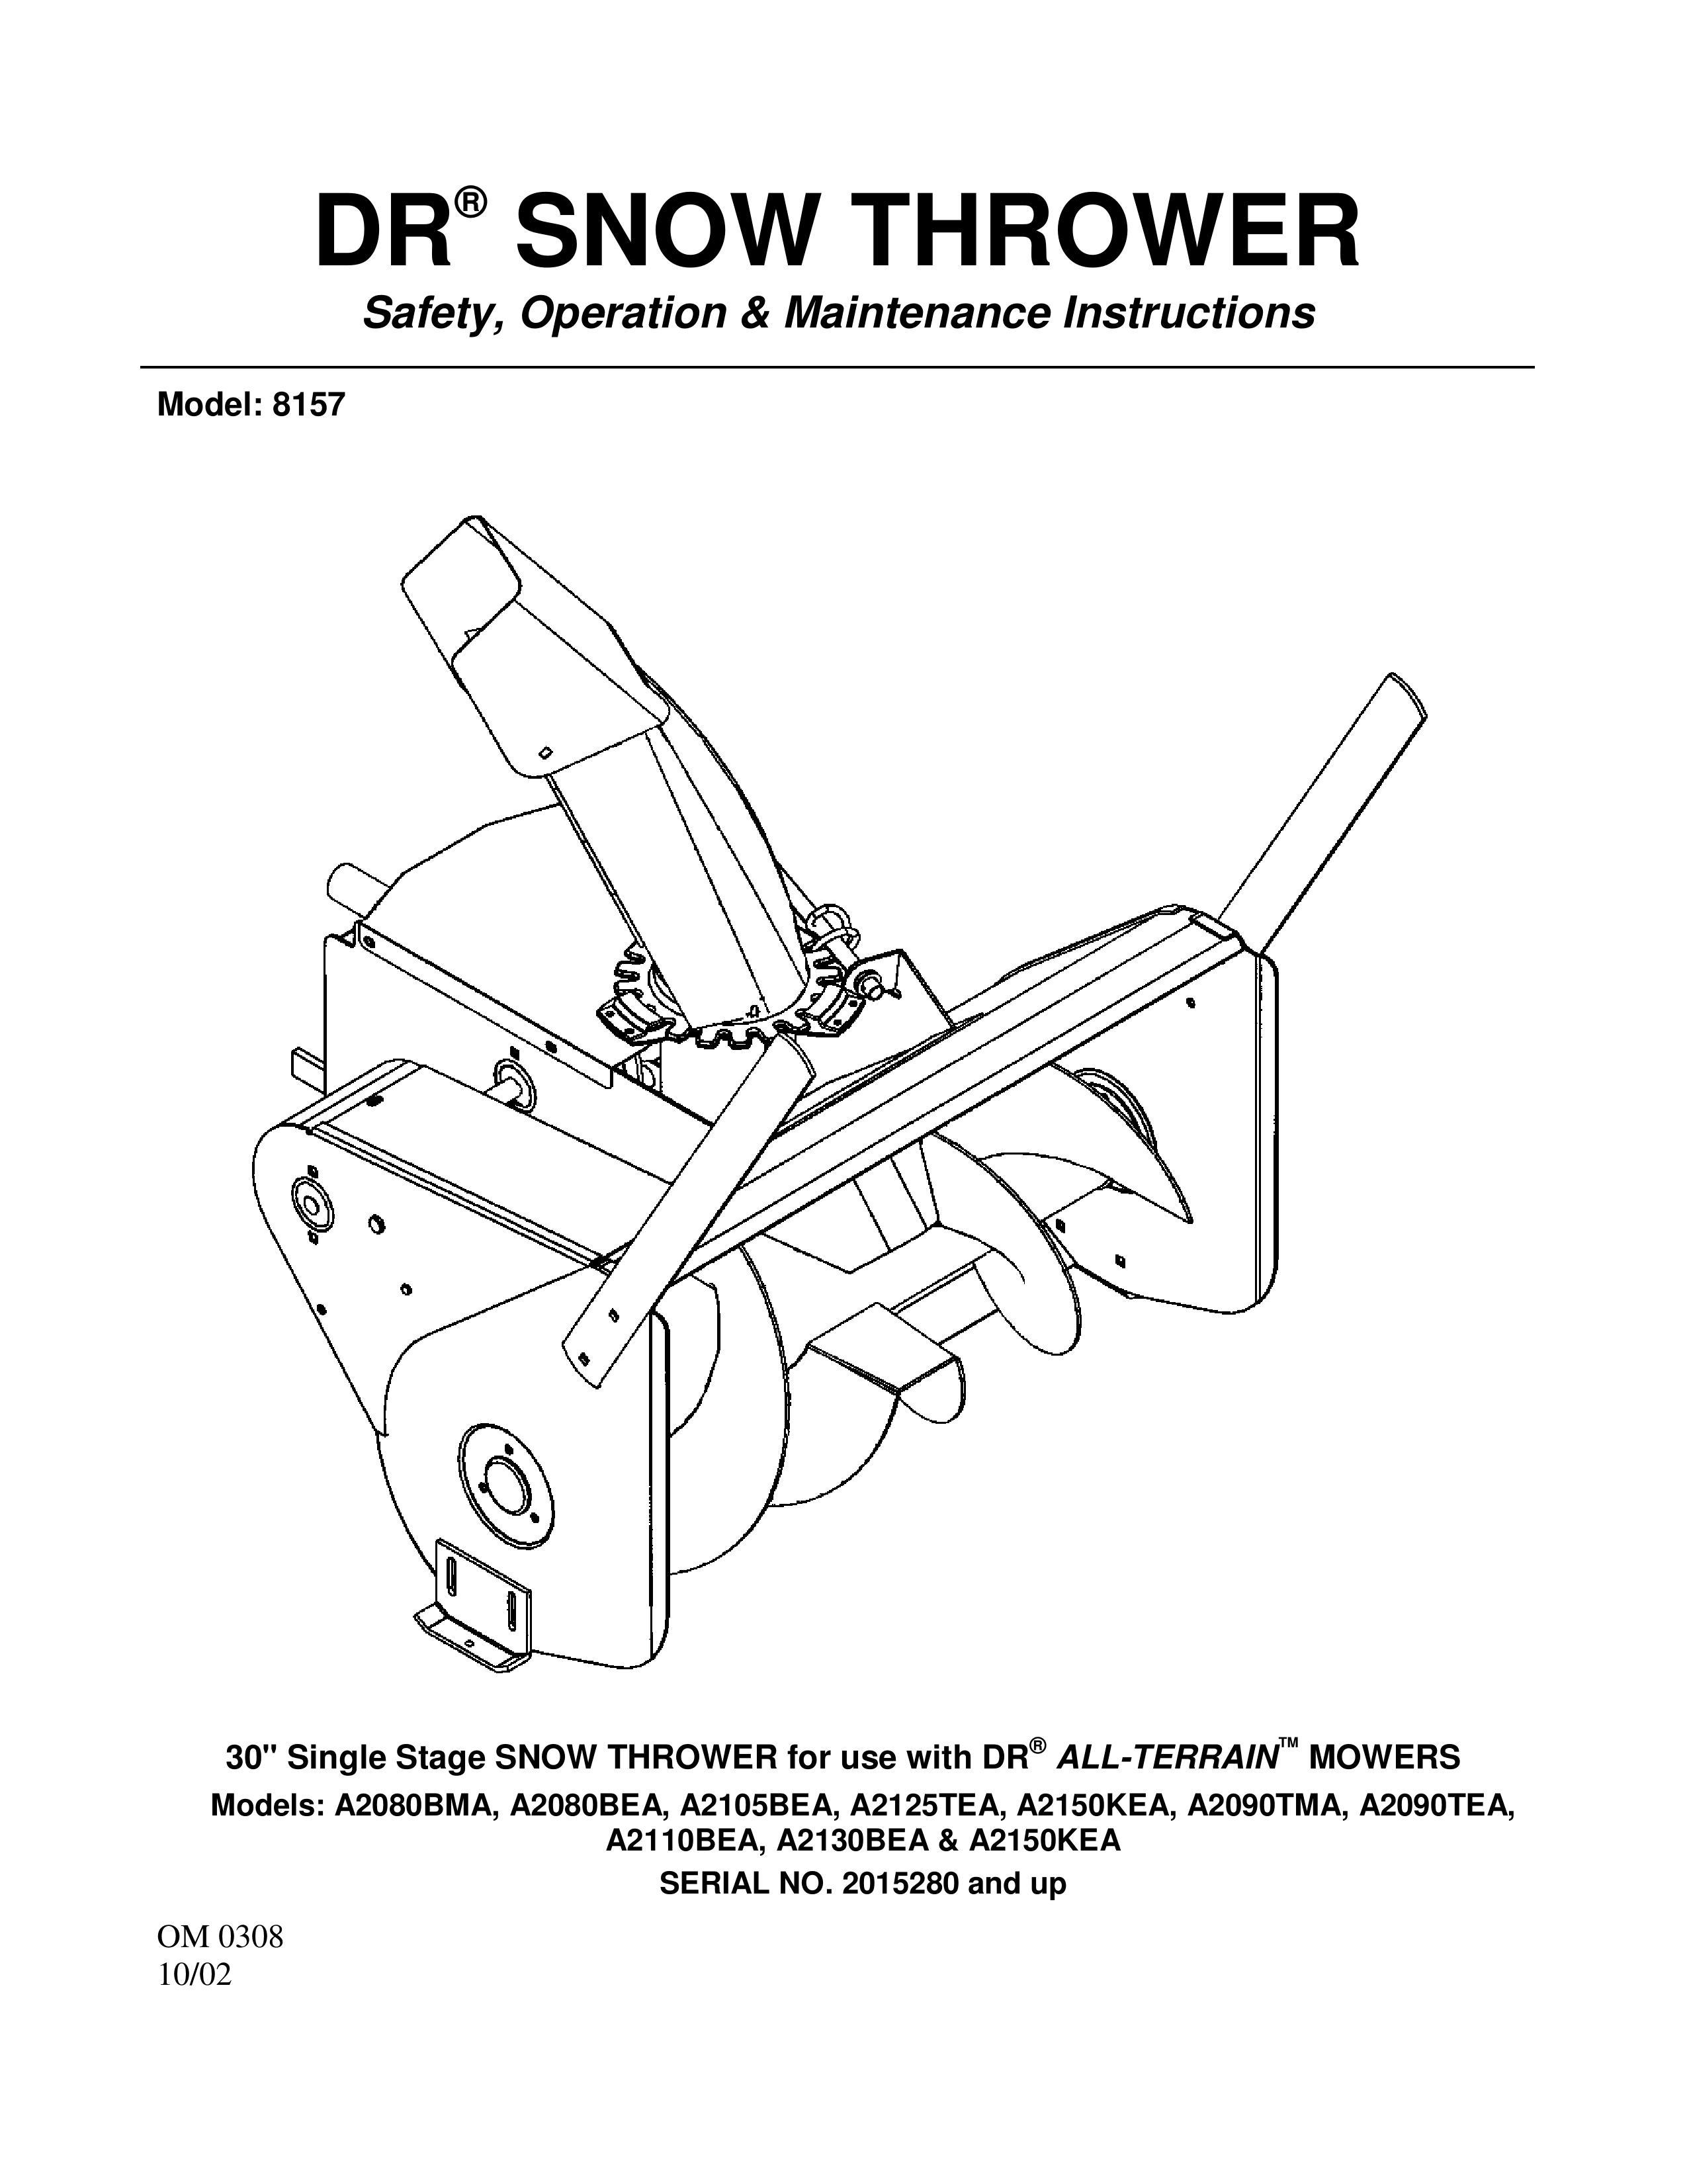 Country Home Products A2090TMA Snow Blower User Manual